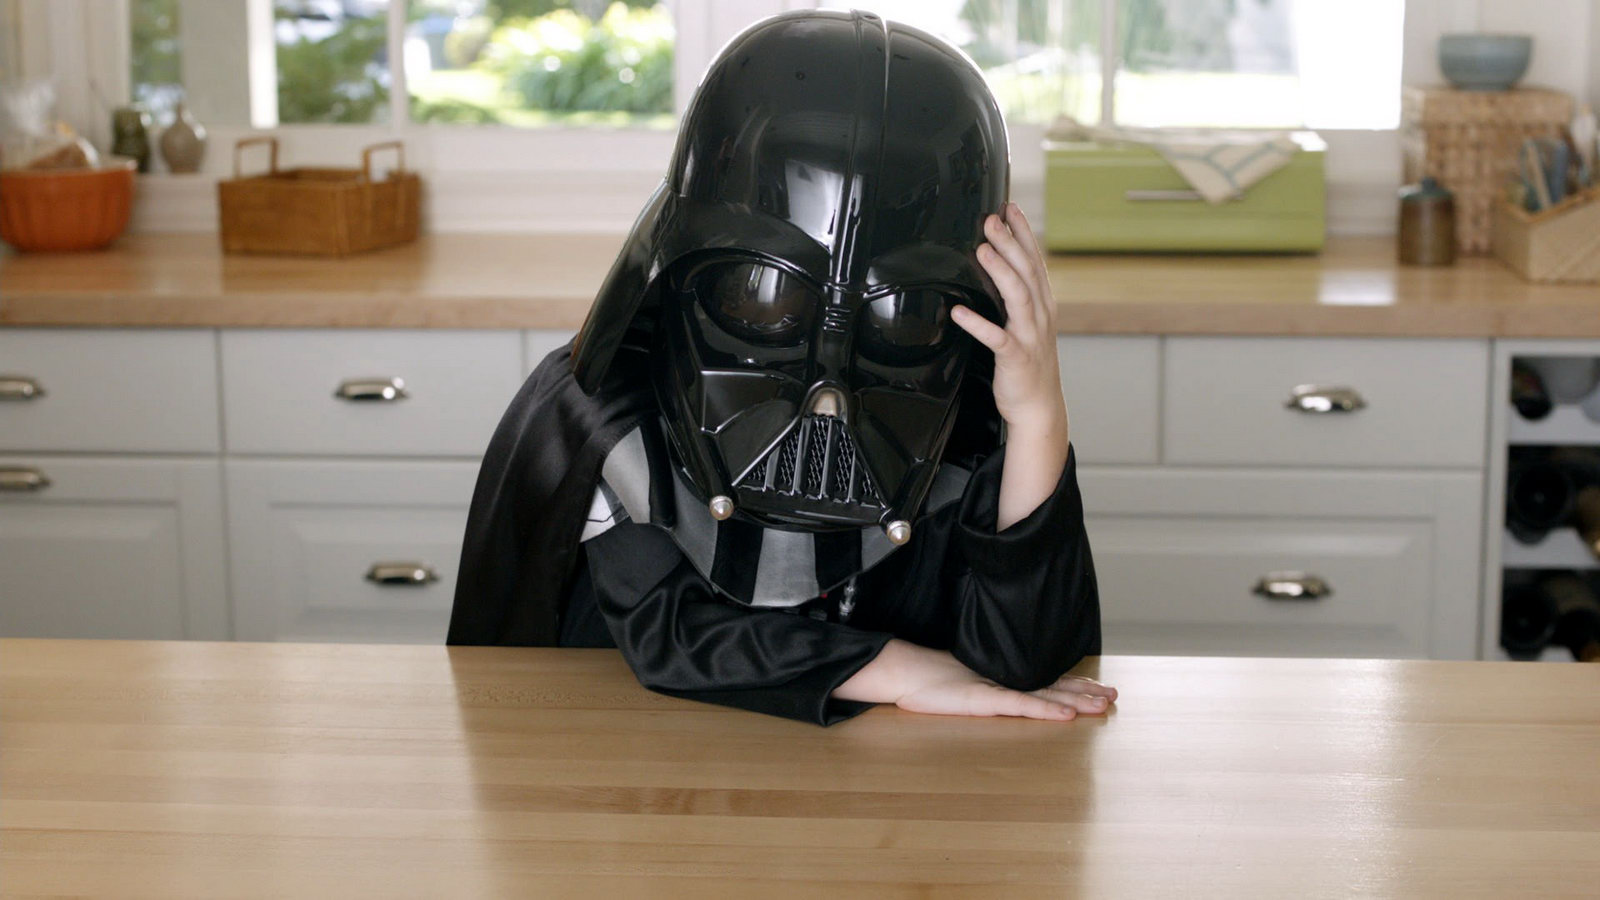 Volkswagen’s Little Darth Vader Uses the Force on the European Passat.